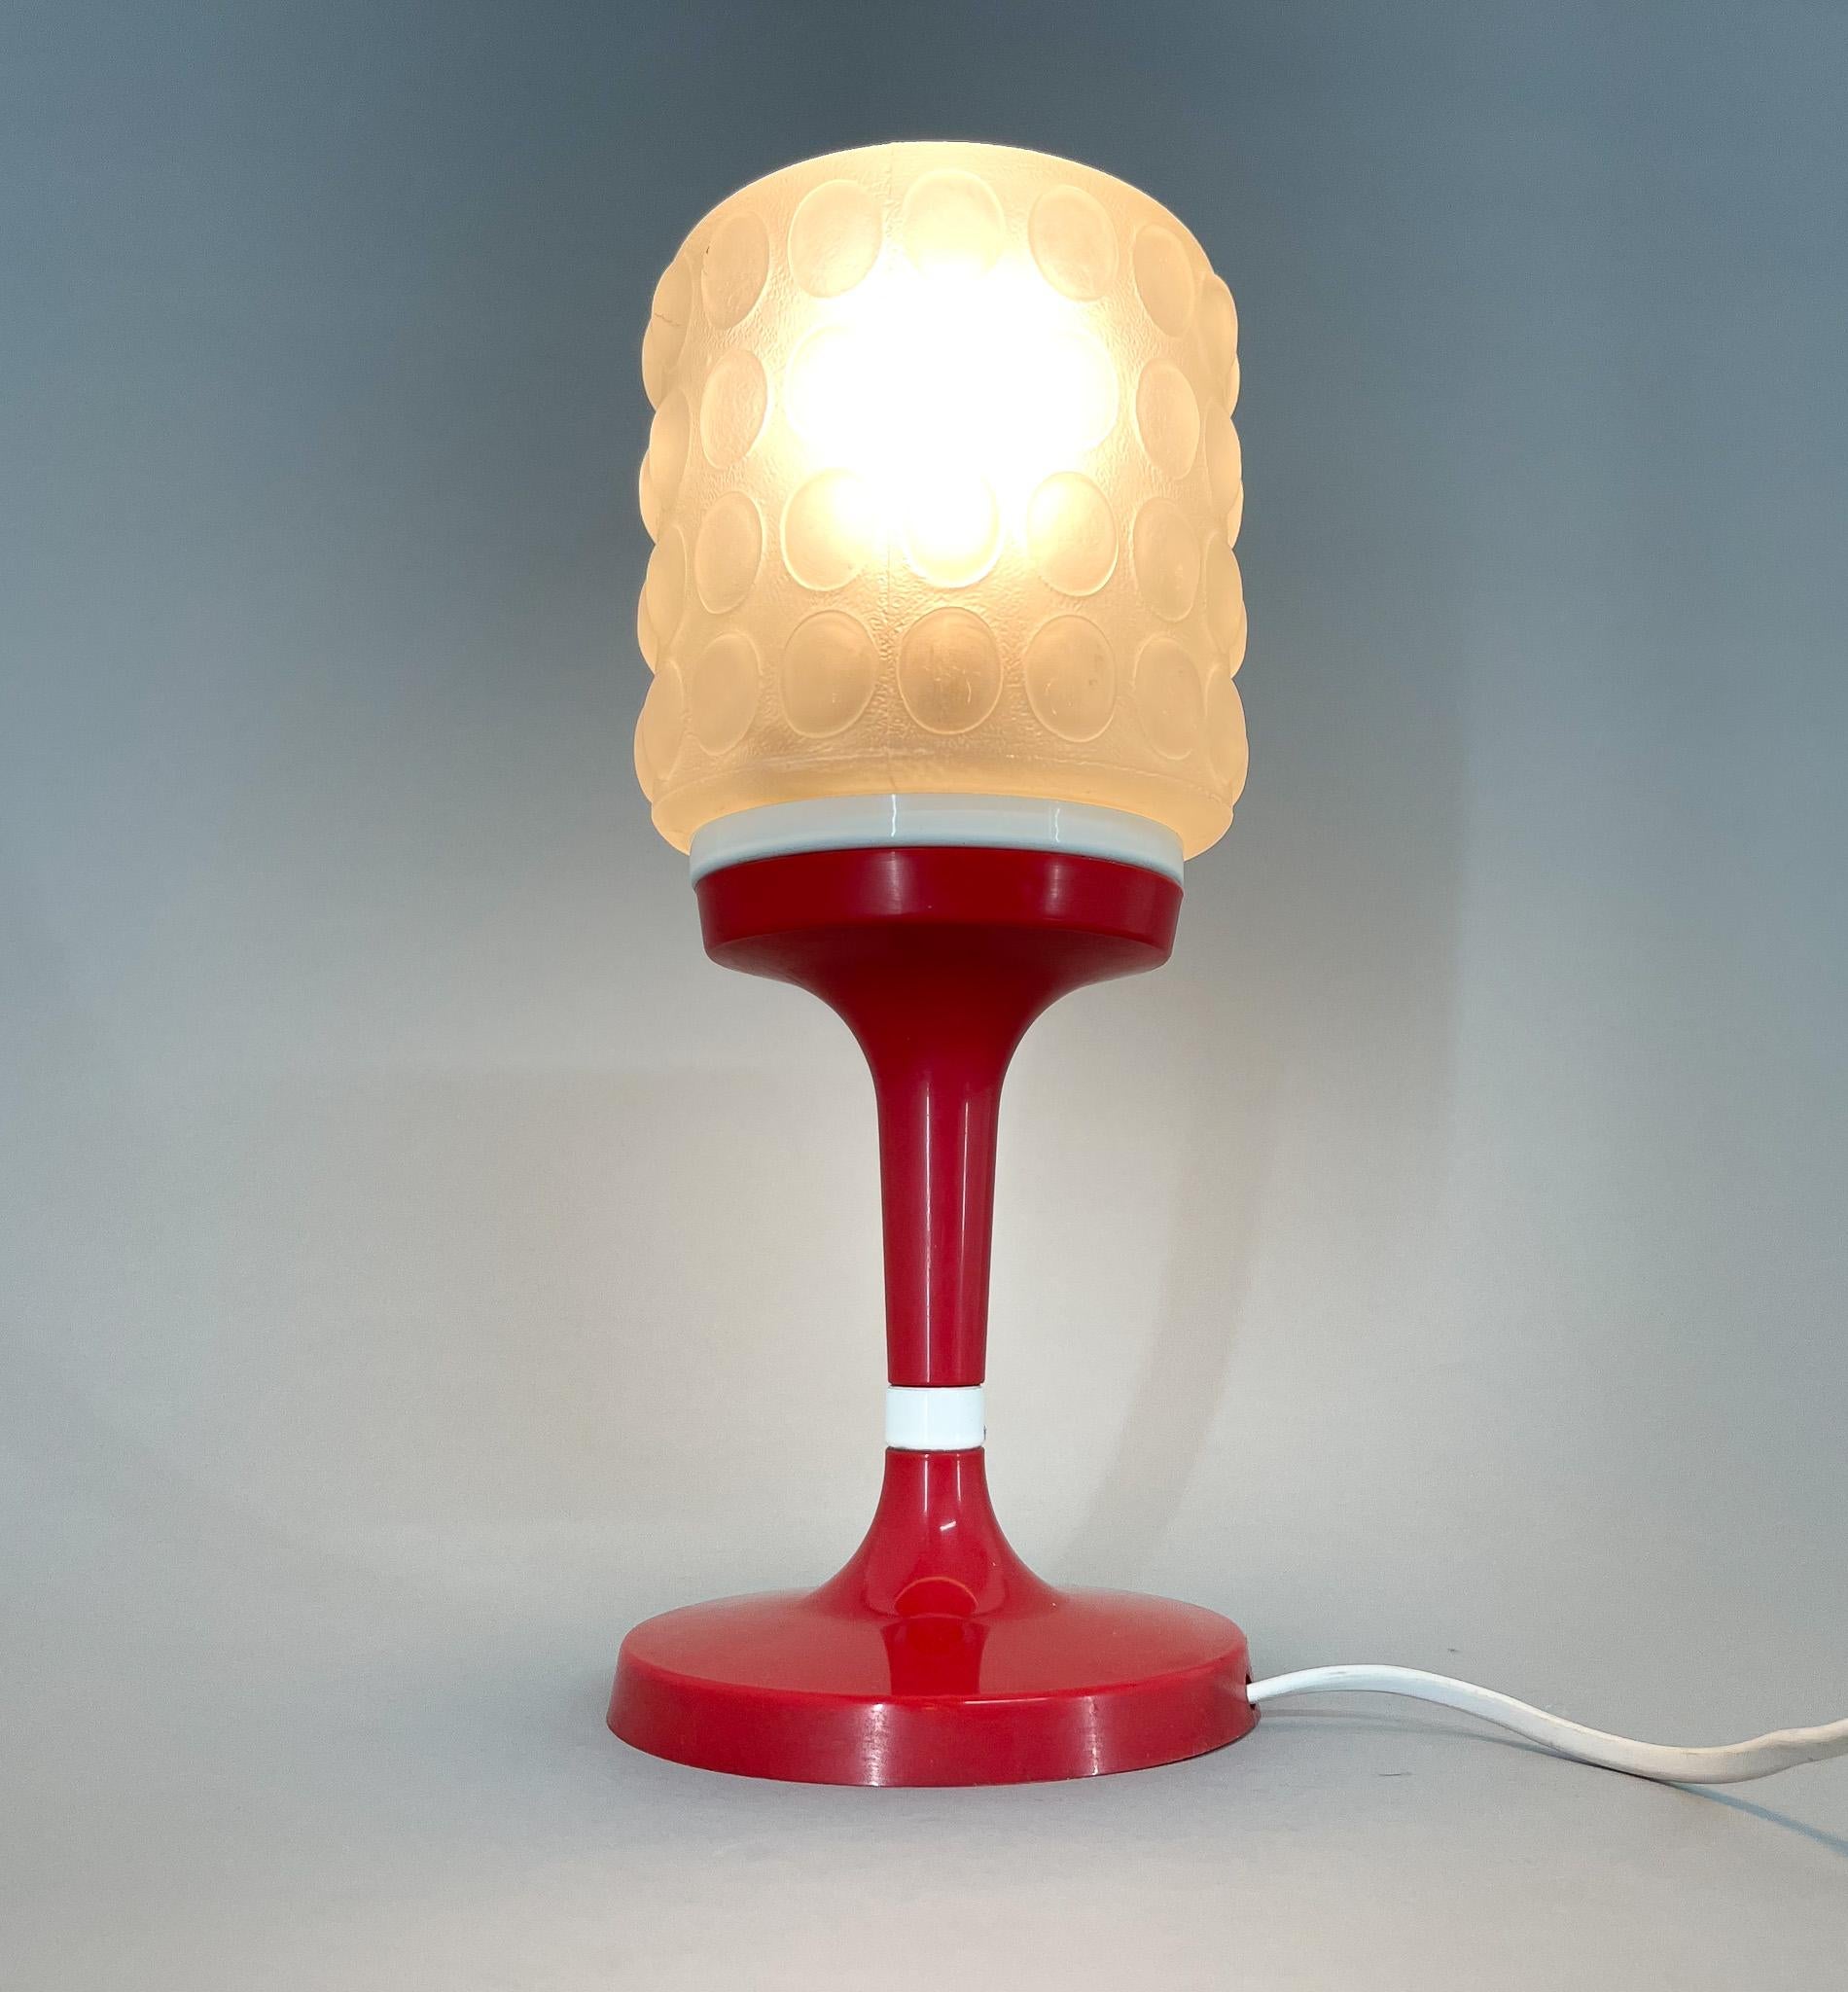 Vintage table lamp made of red and white plastic and glass. Produced by Elektroinstala Jílové in Former Czechoslovakia in the 1970s.